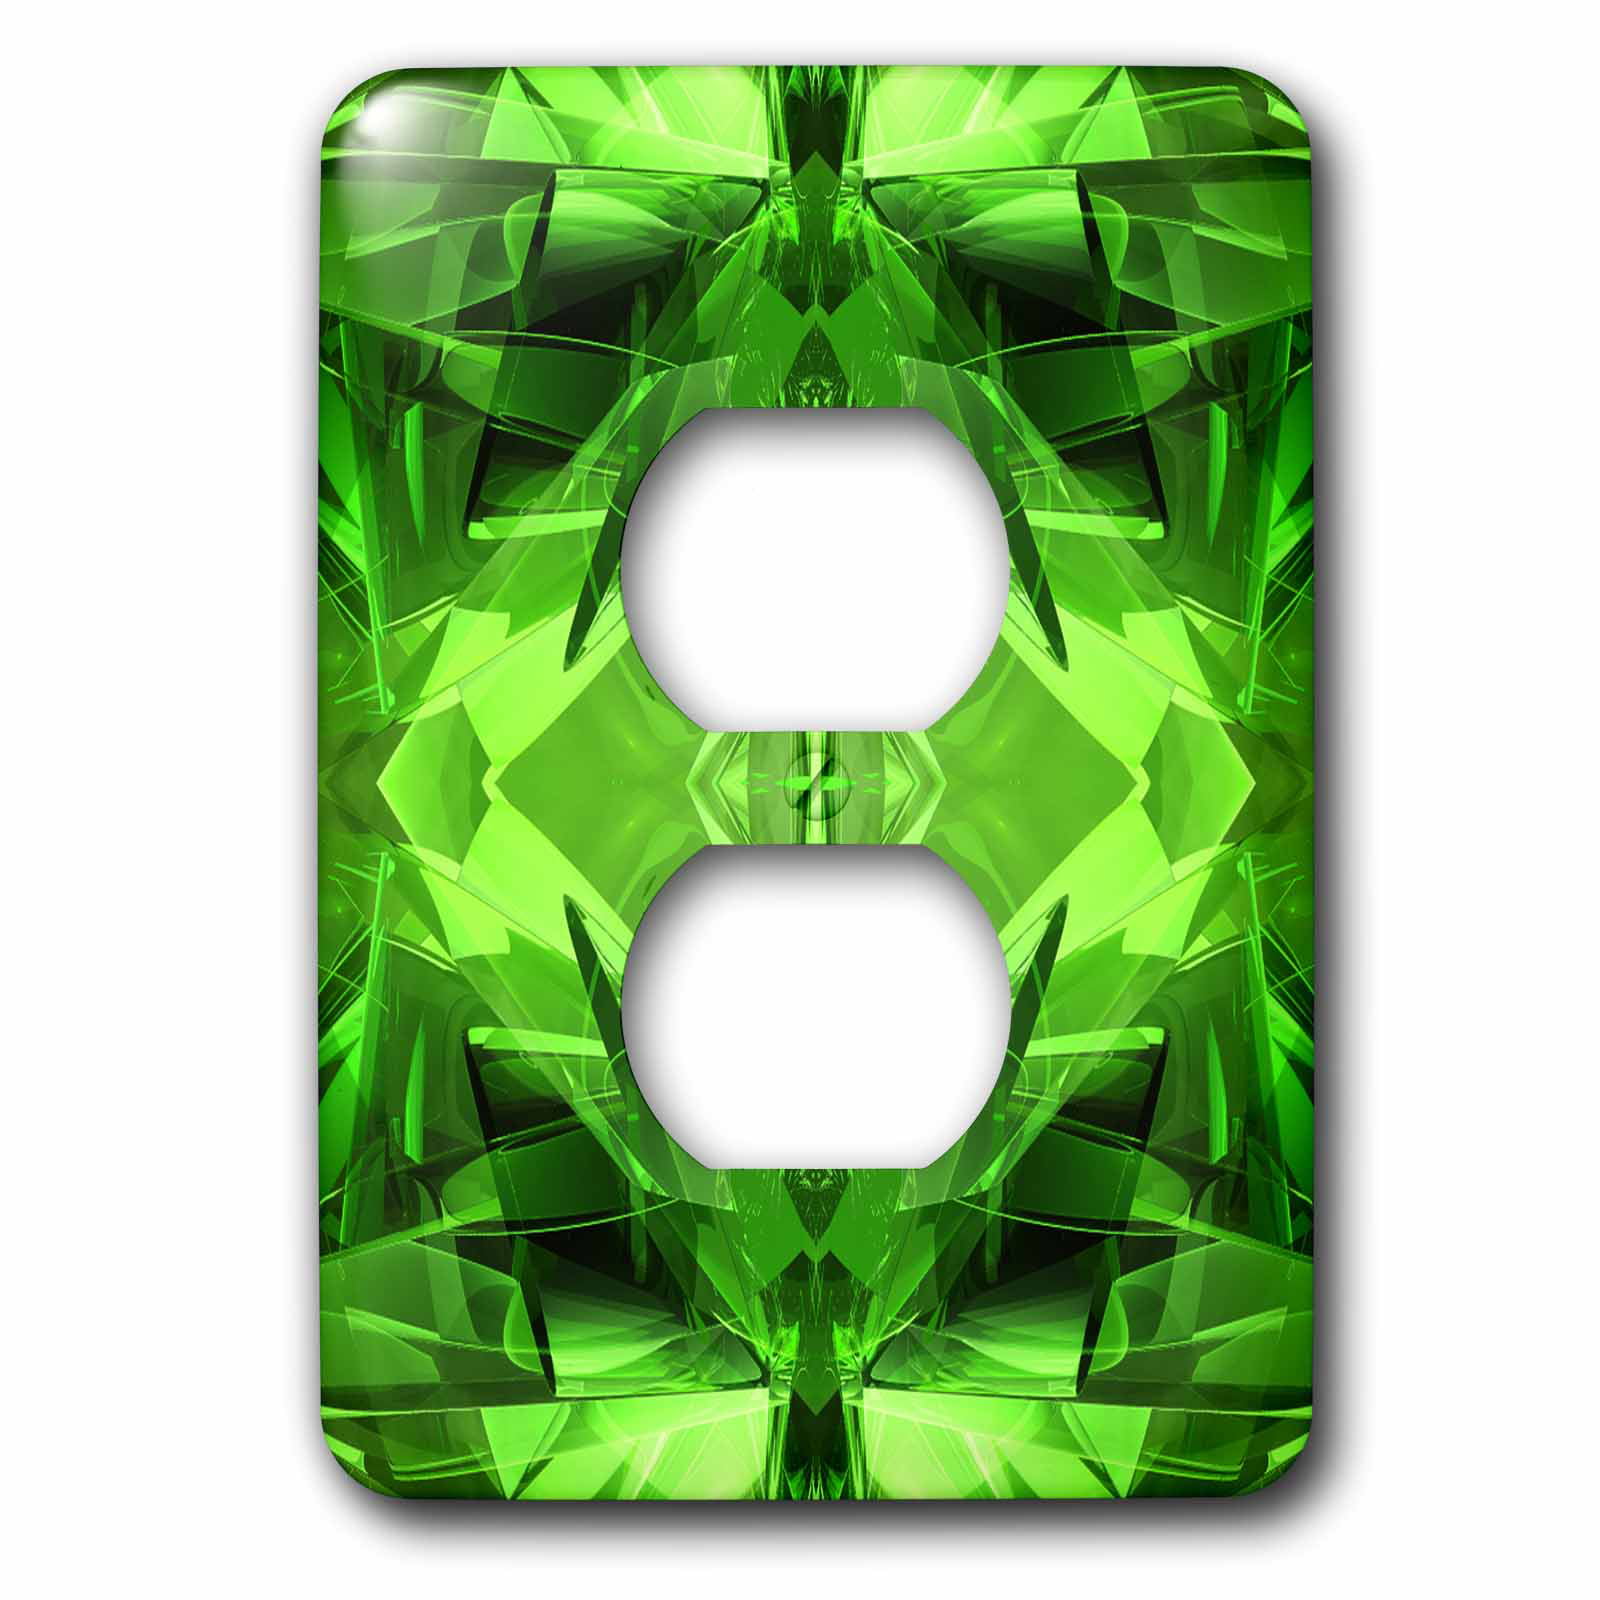 3dRose lsp_21919_6 Green Mandala Abstract Symmetrical Digital Mandala Created with Green Metal 2-Plug Outlet Cover 